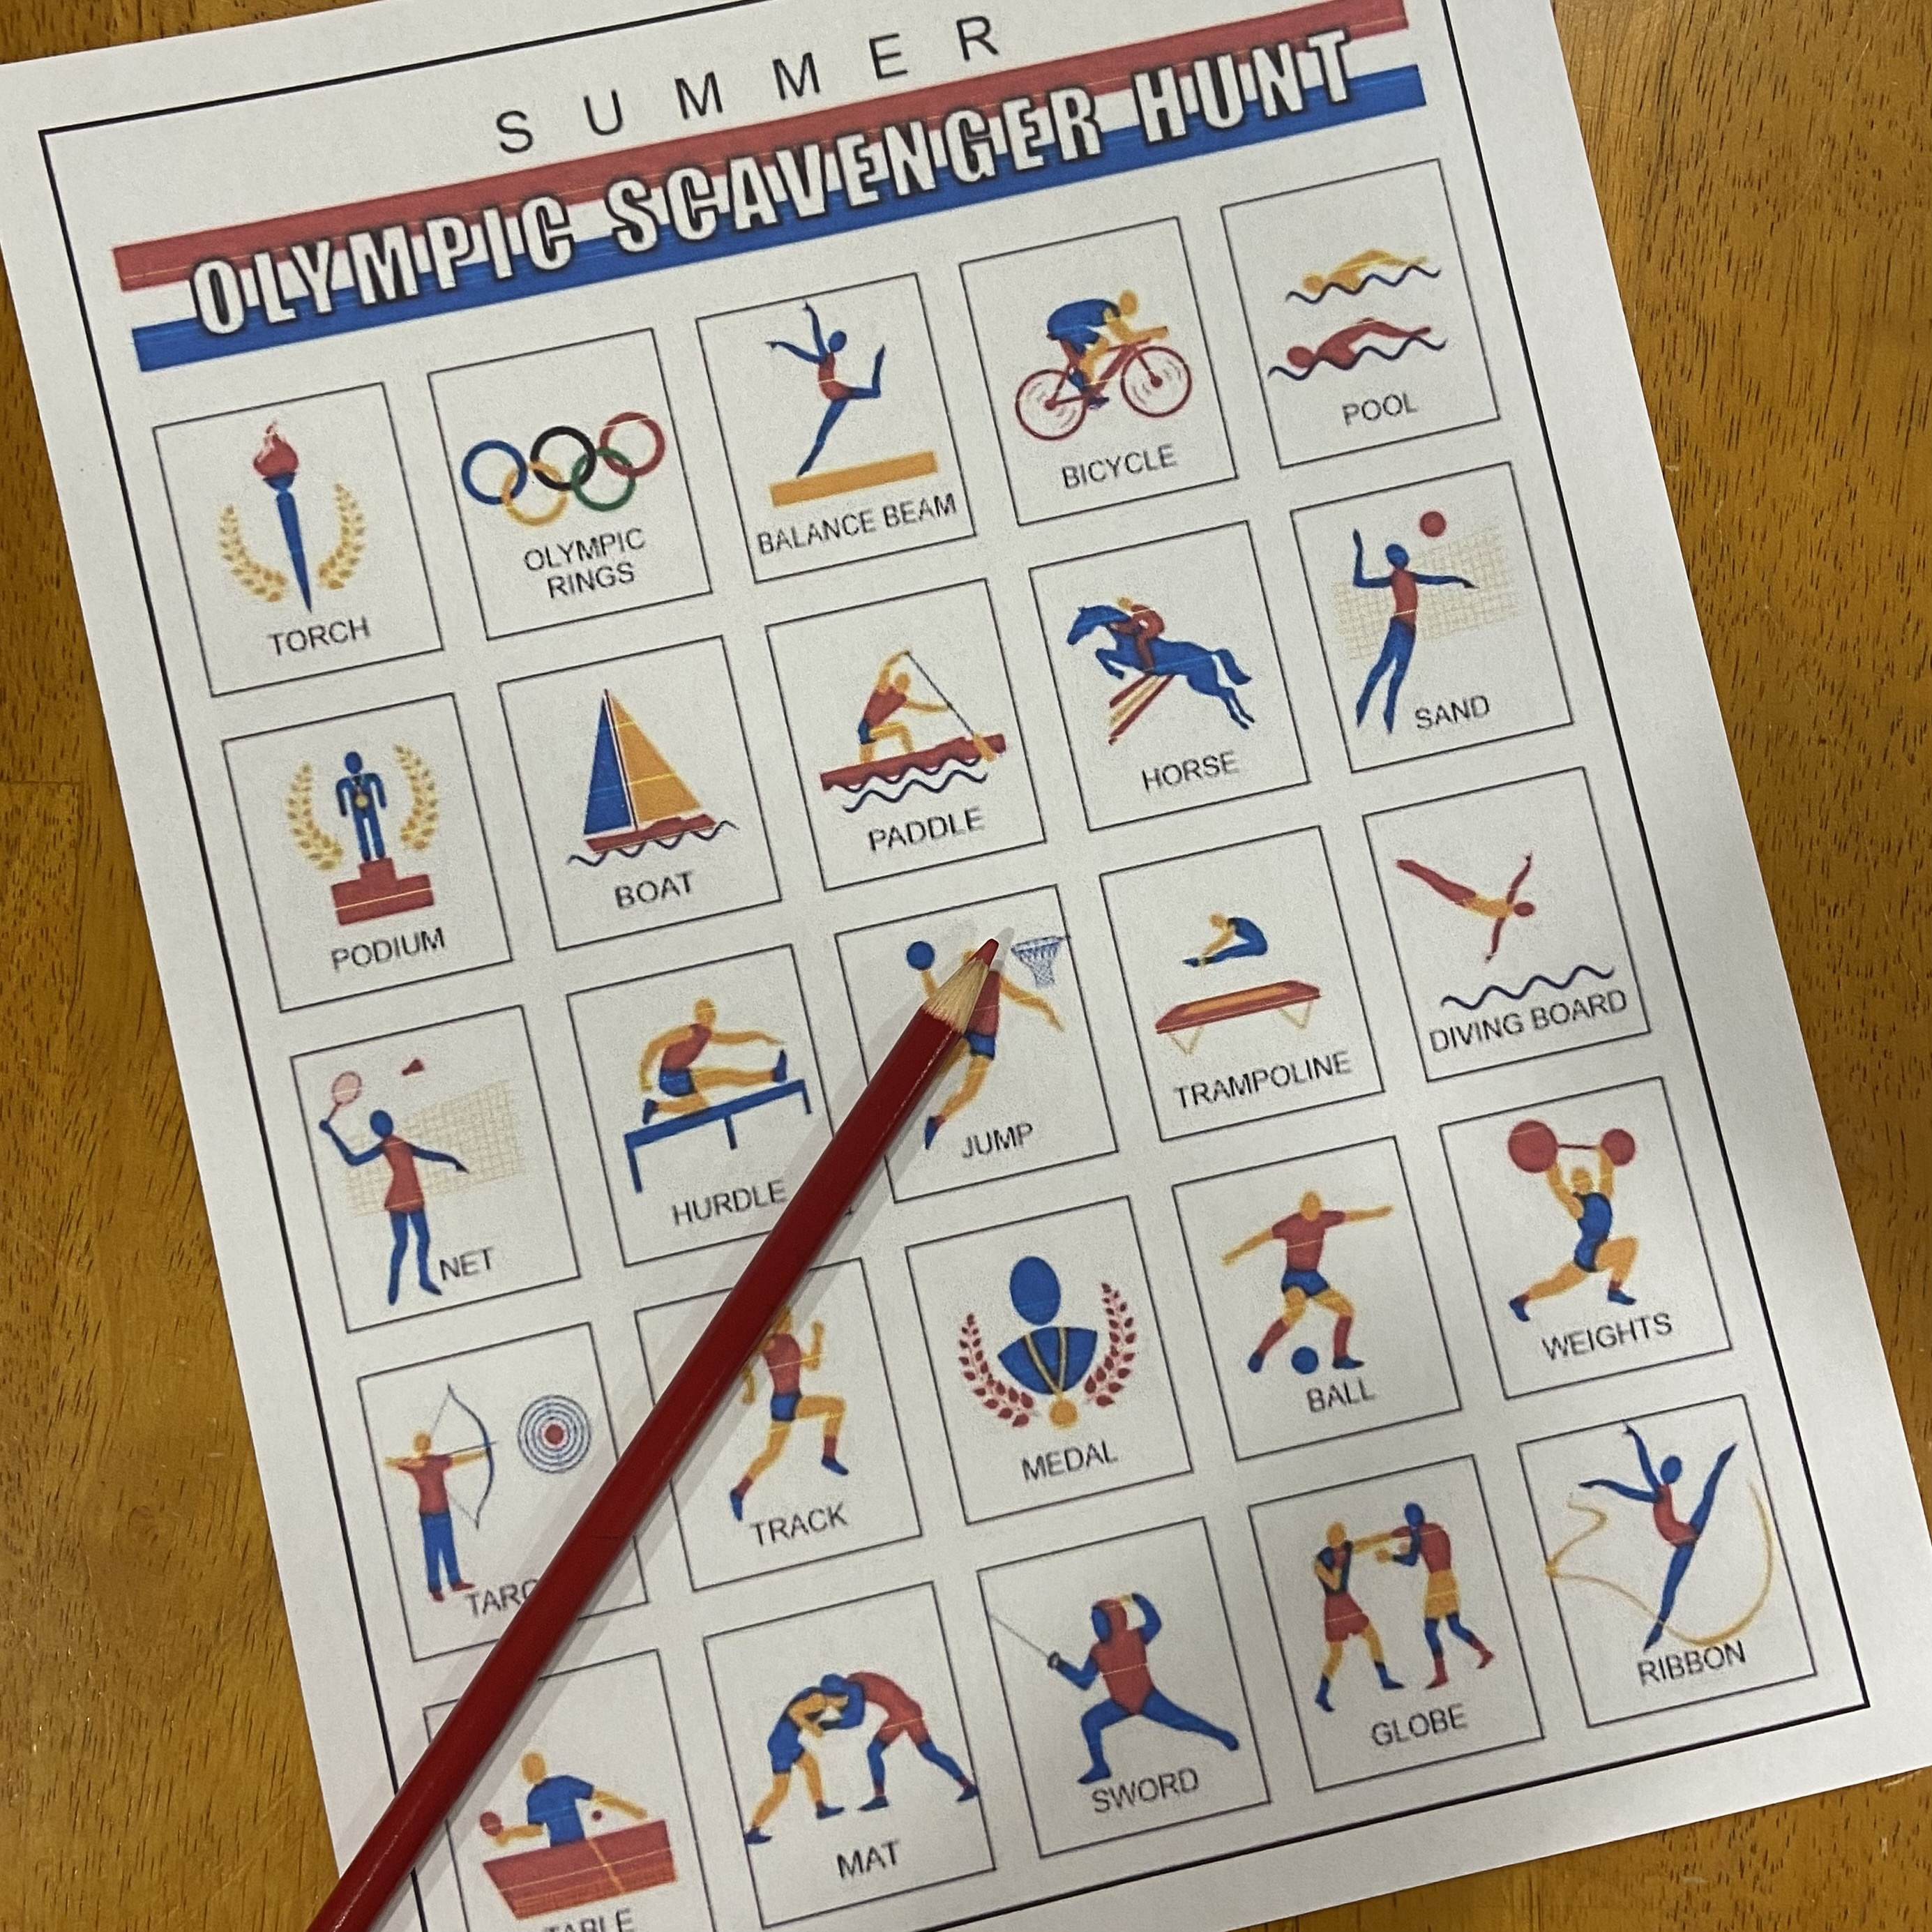 Scavenger Hunt featuring the Olympics